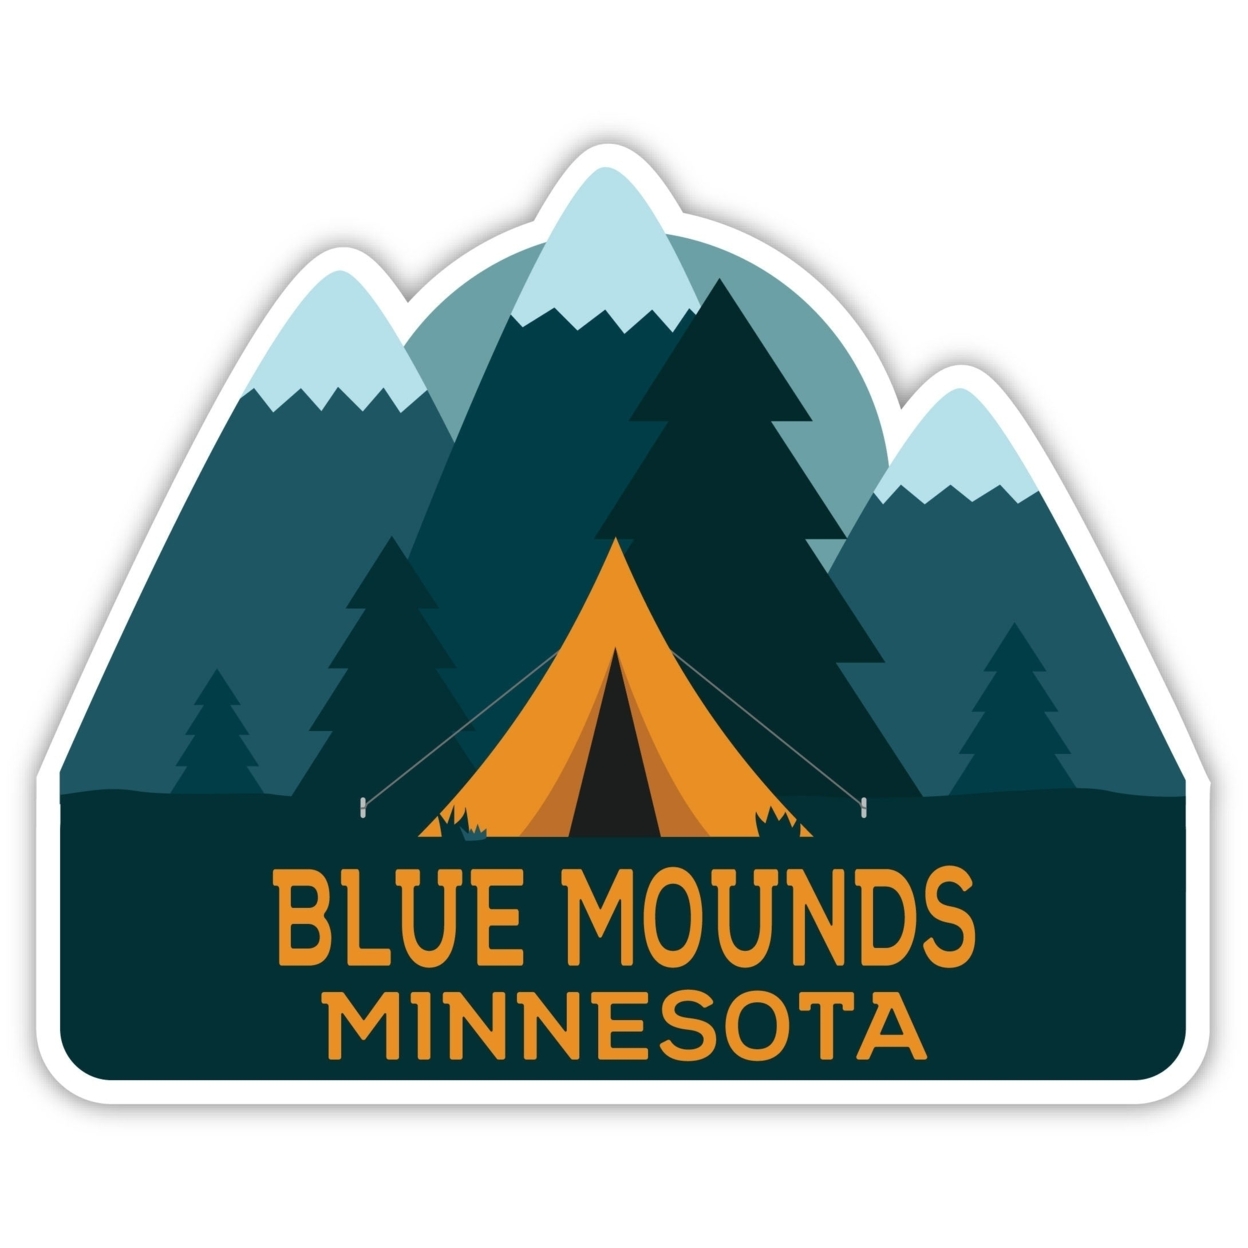 Blue Mounds Minnesota Souvenir Decorative Stickers (Choose Theme And Size) - 4-Pack, 12-Inch, Tent